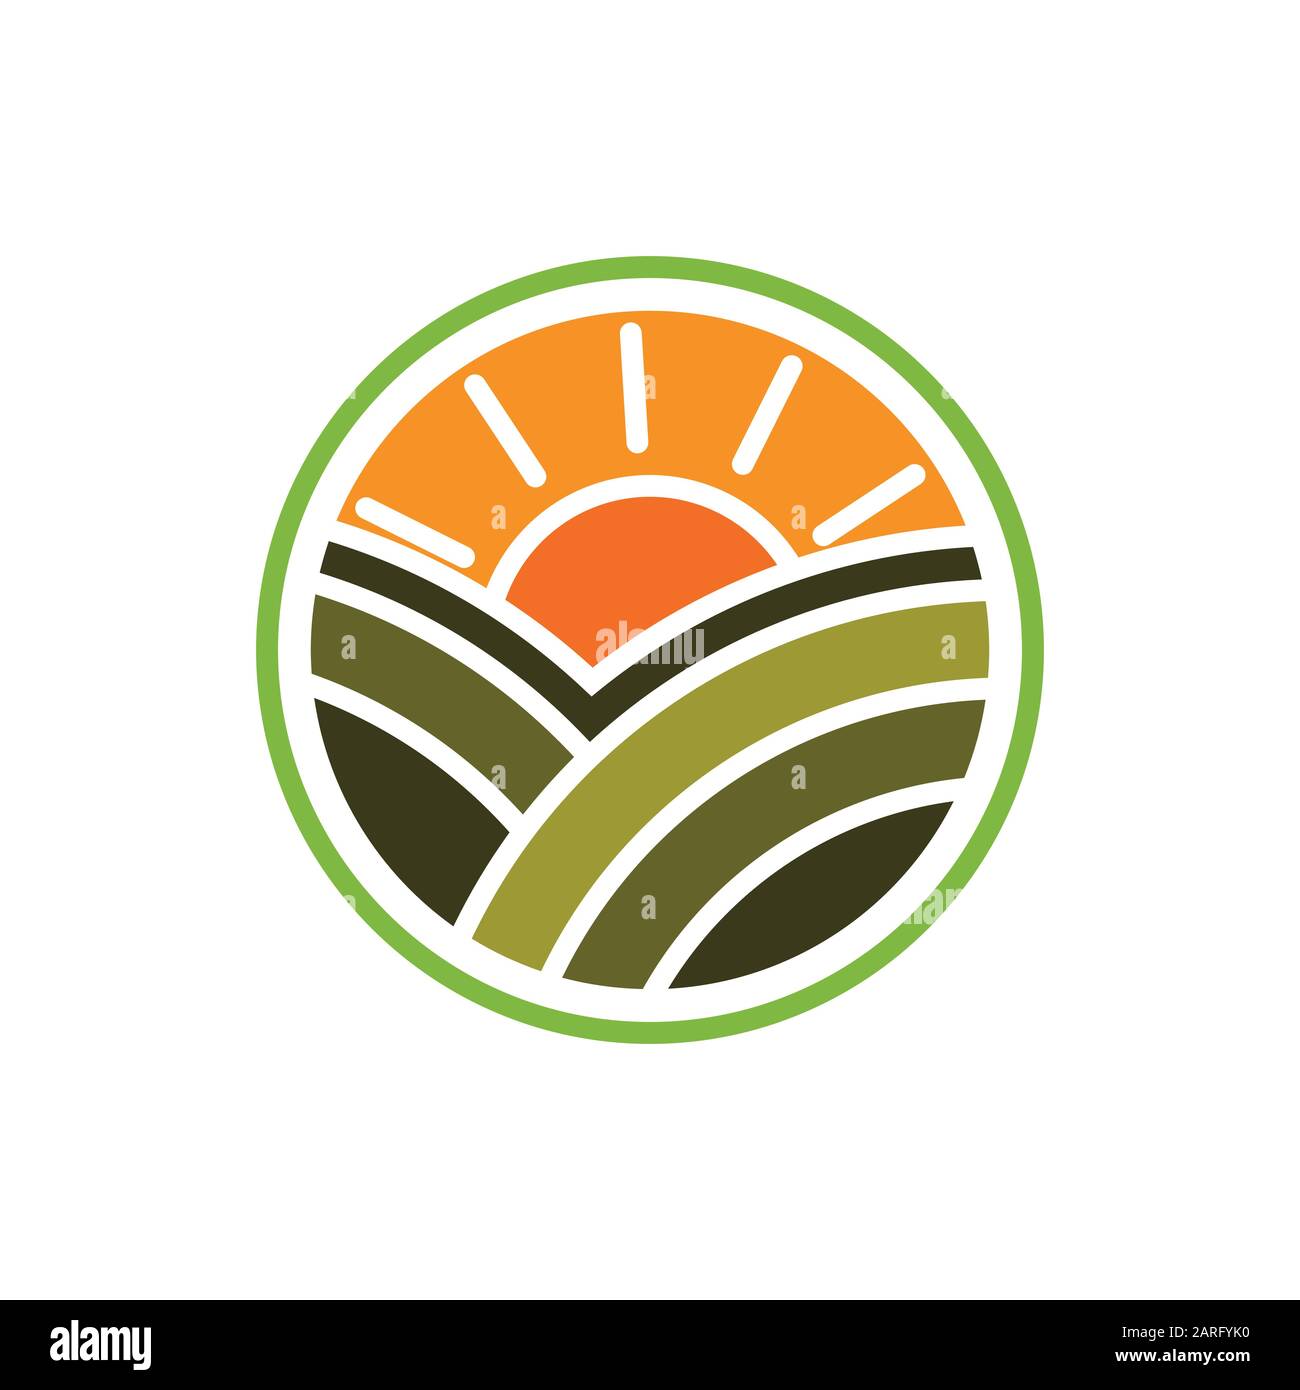 Agriculture logo design template, Agriculture field with sun sign symbol. Stock Vector